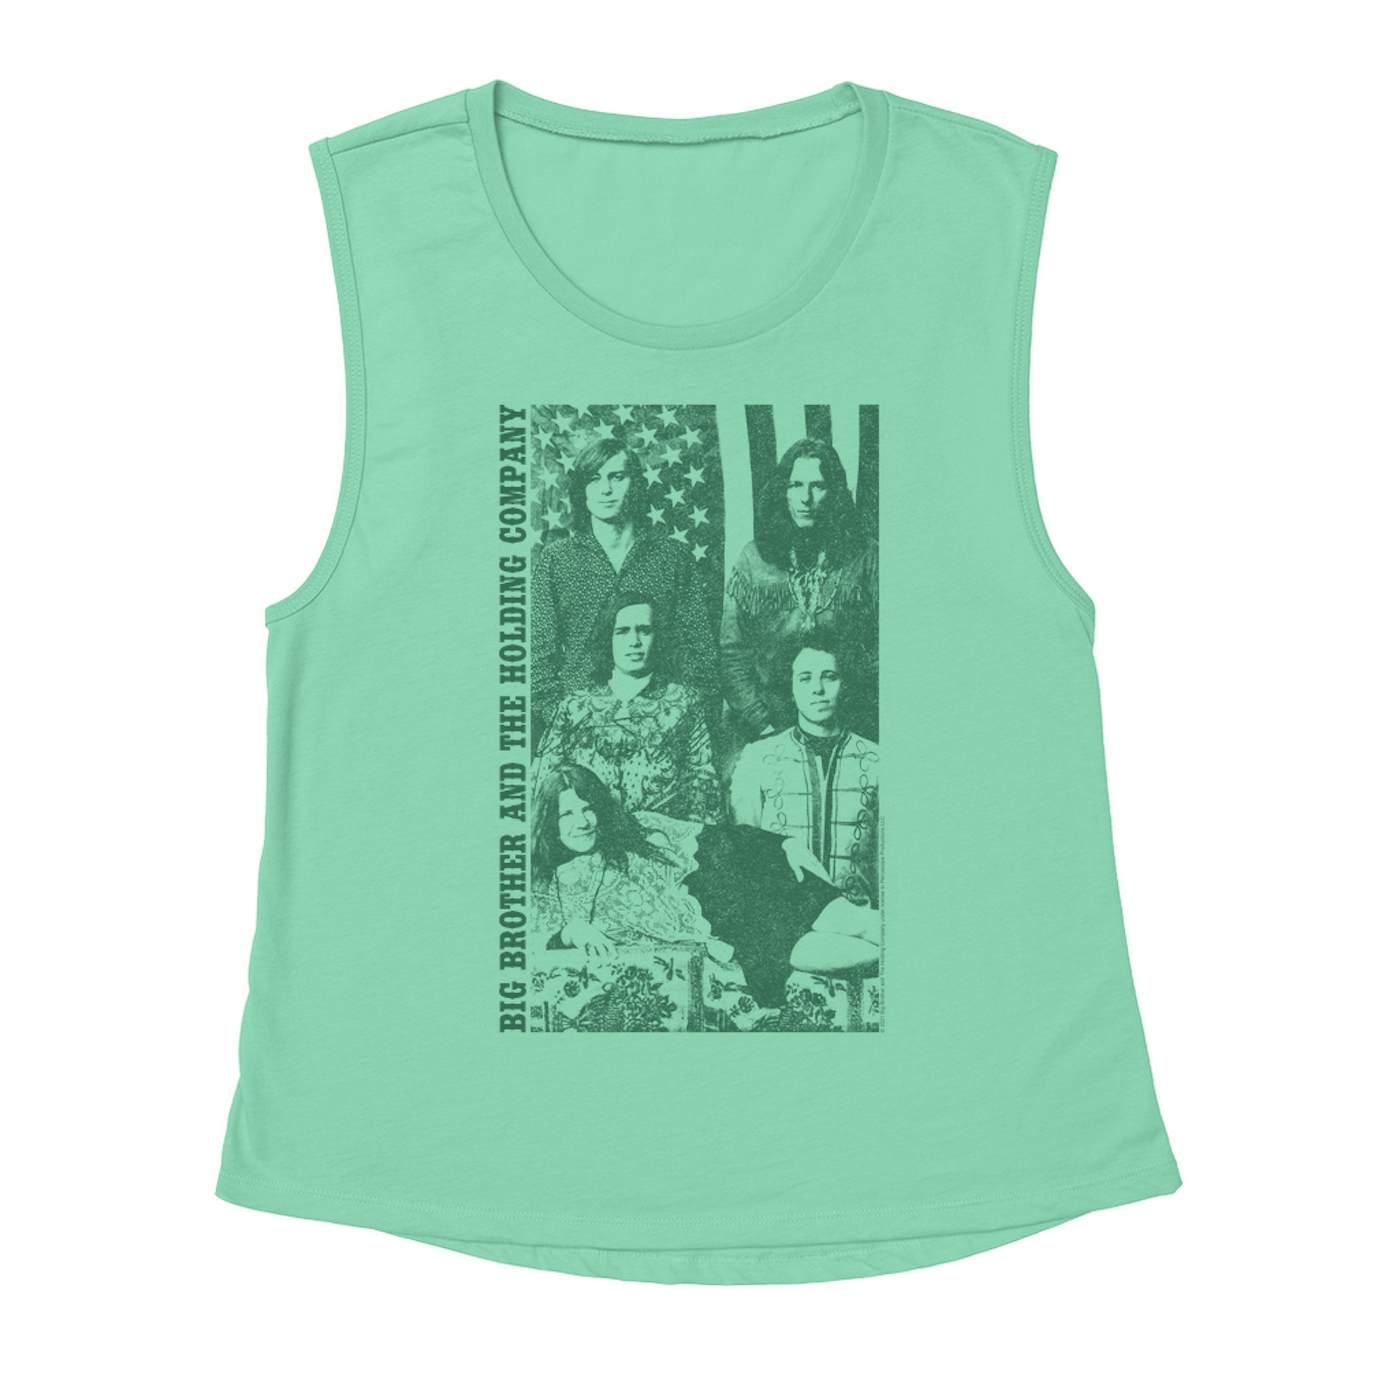 Big Brother & The Holding Company Big Brother and The Holding Co. Ladies' Muscle Tank Top | Featuring Janis Joplin Group Flag Photo Big Brother and The Holding Co. Shirt (Merchbar Exclusive)